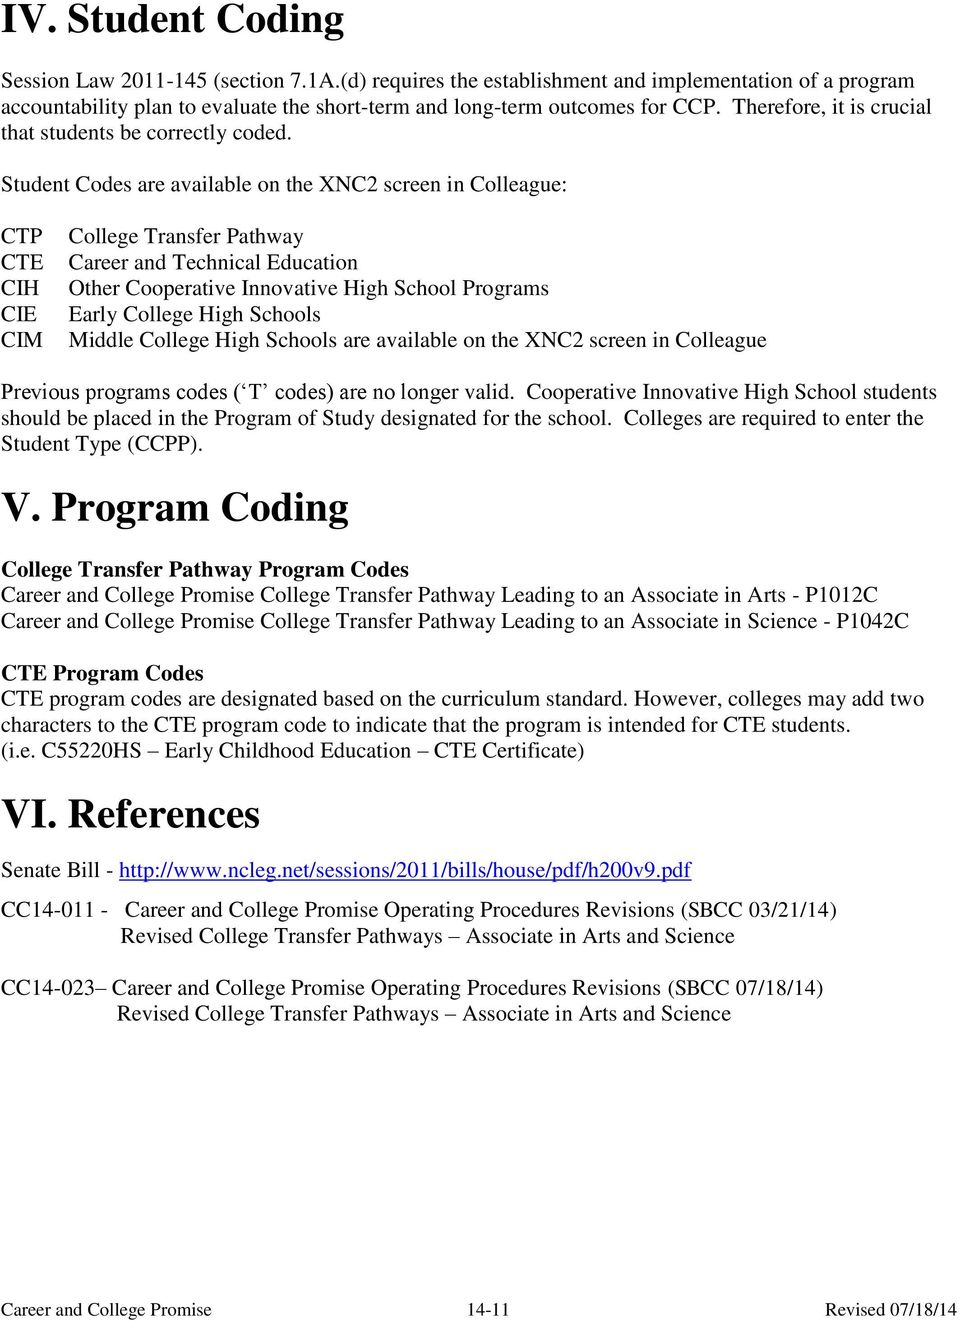 Student Codes are available on the XNC2 screen in Colleague: CTP CTE CIH CIE CIM College Transfer Pathway Career and Technical Education Other Cooperative Innovative High School Programs Early